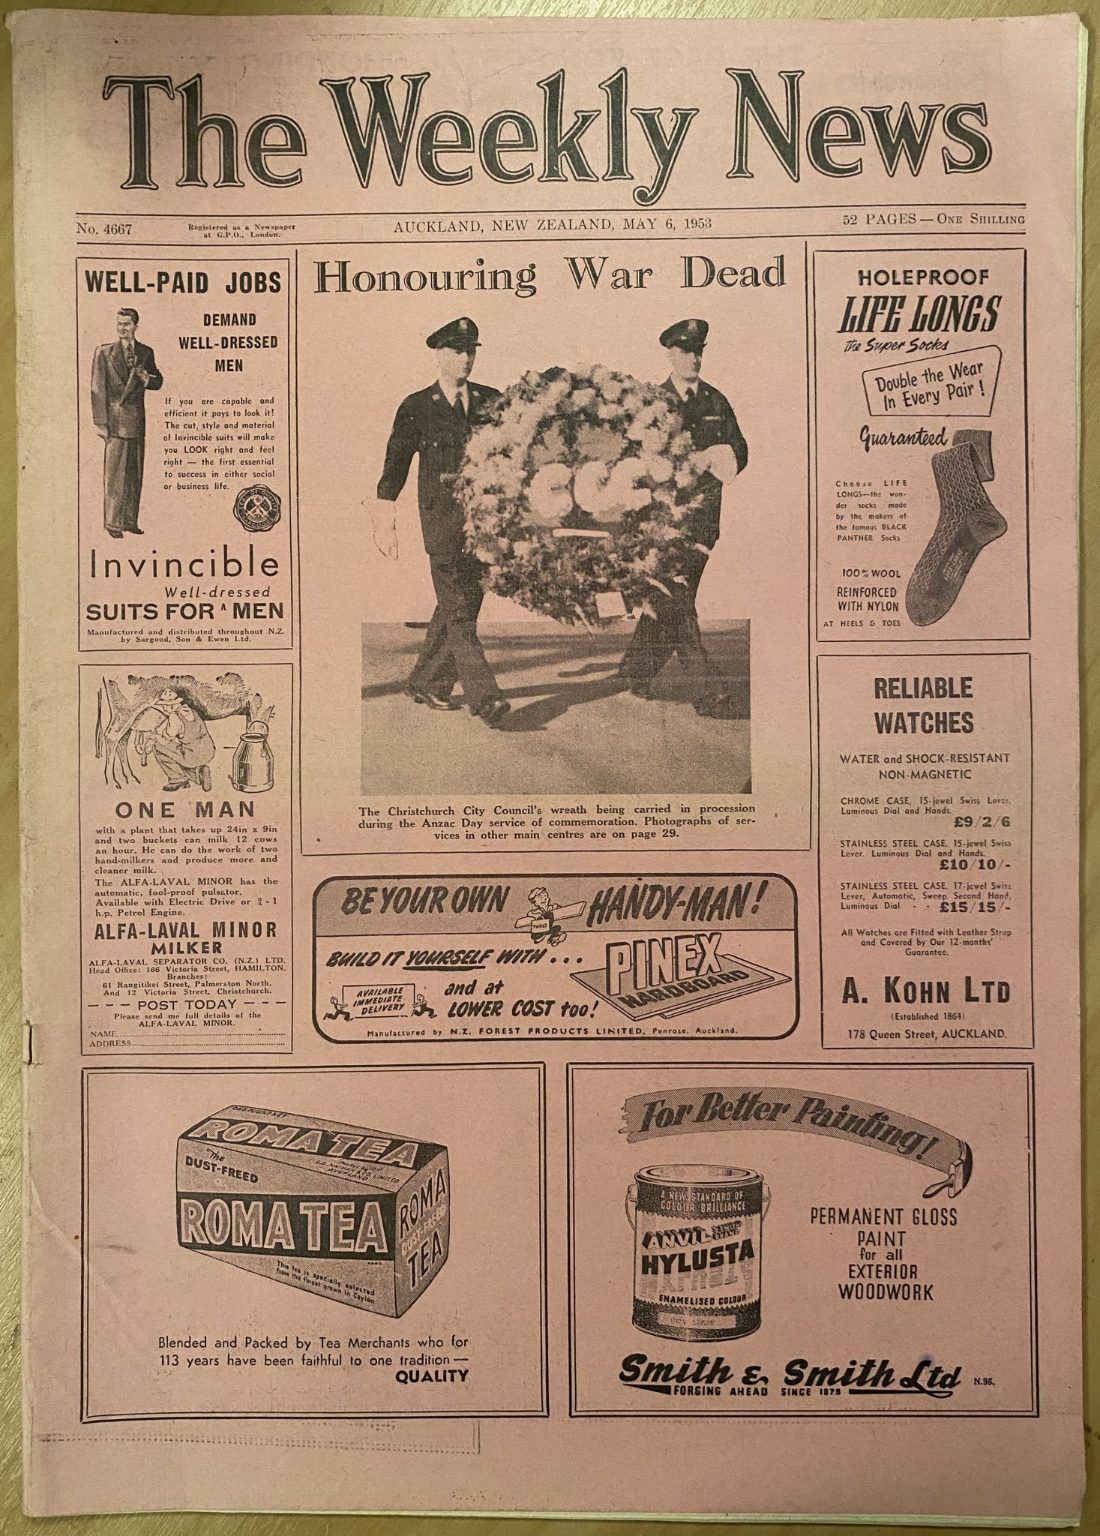 OLD NEWSPAPER: The Weekly News - No. 4667, 6 May 1953